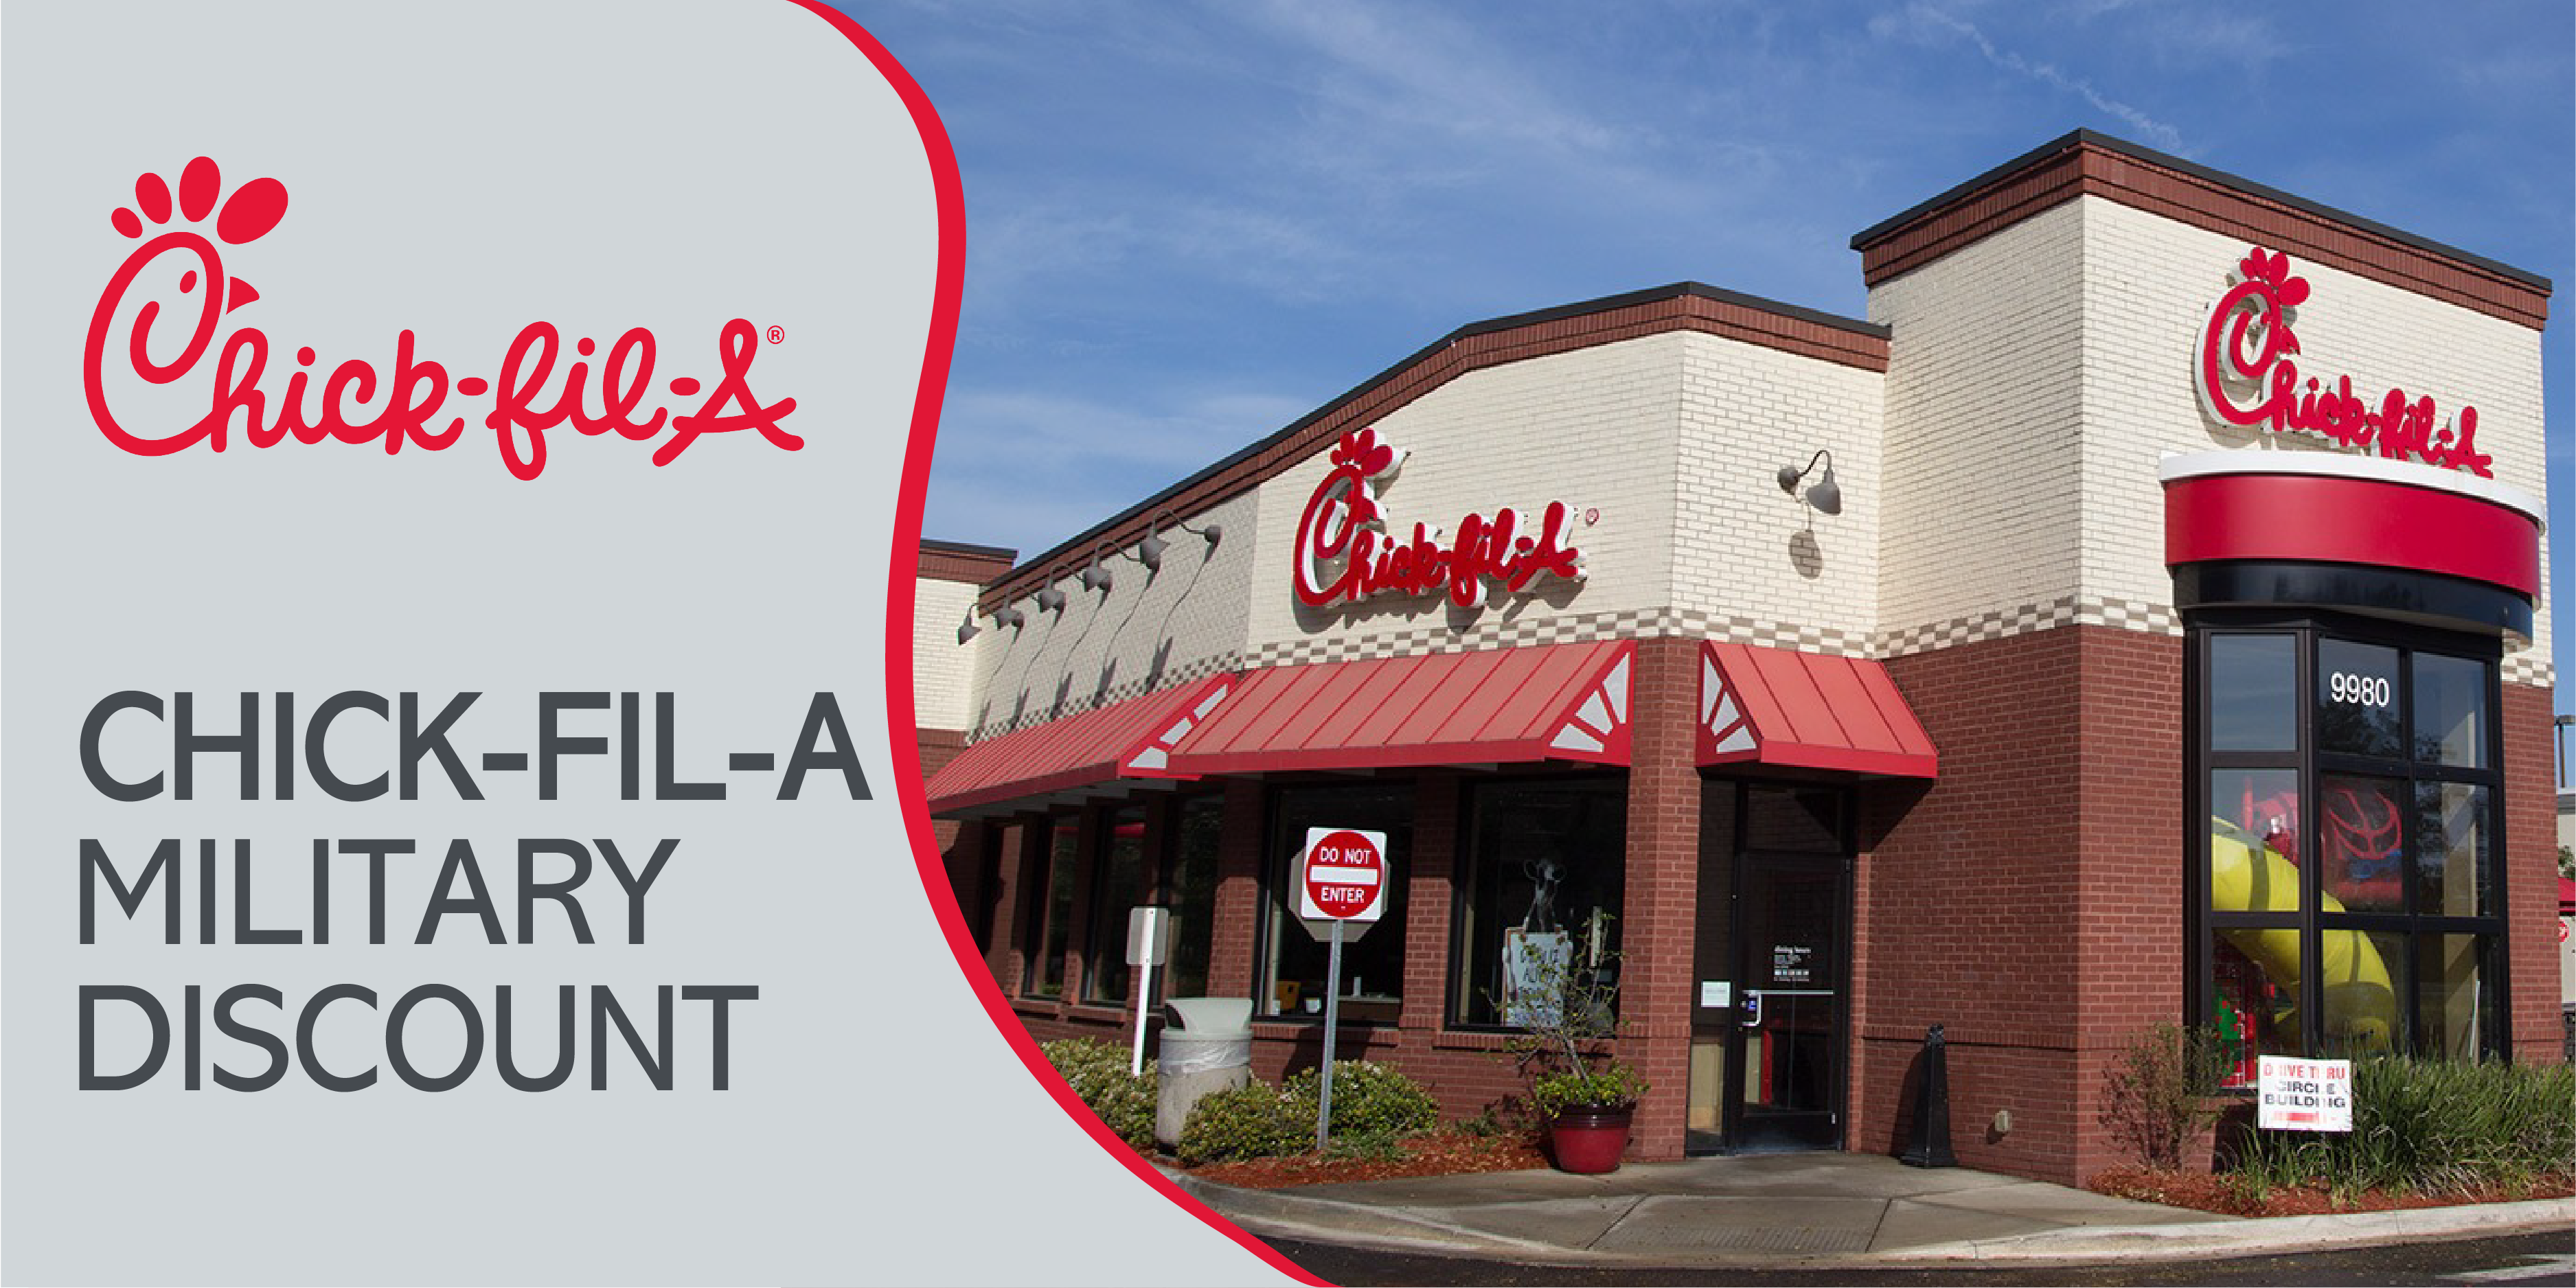 Chick-fil-a Military Discount